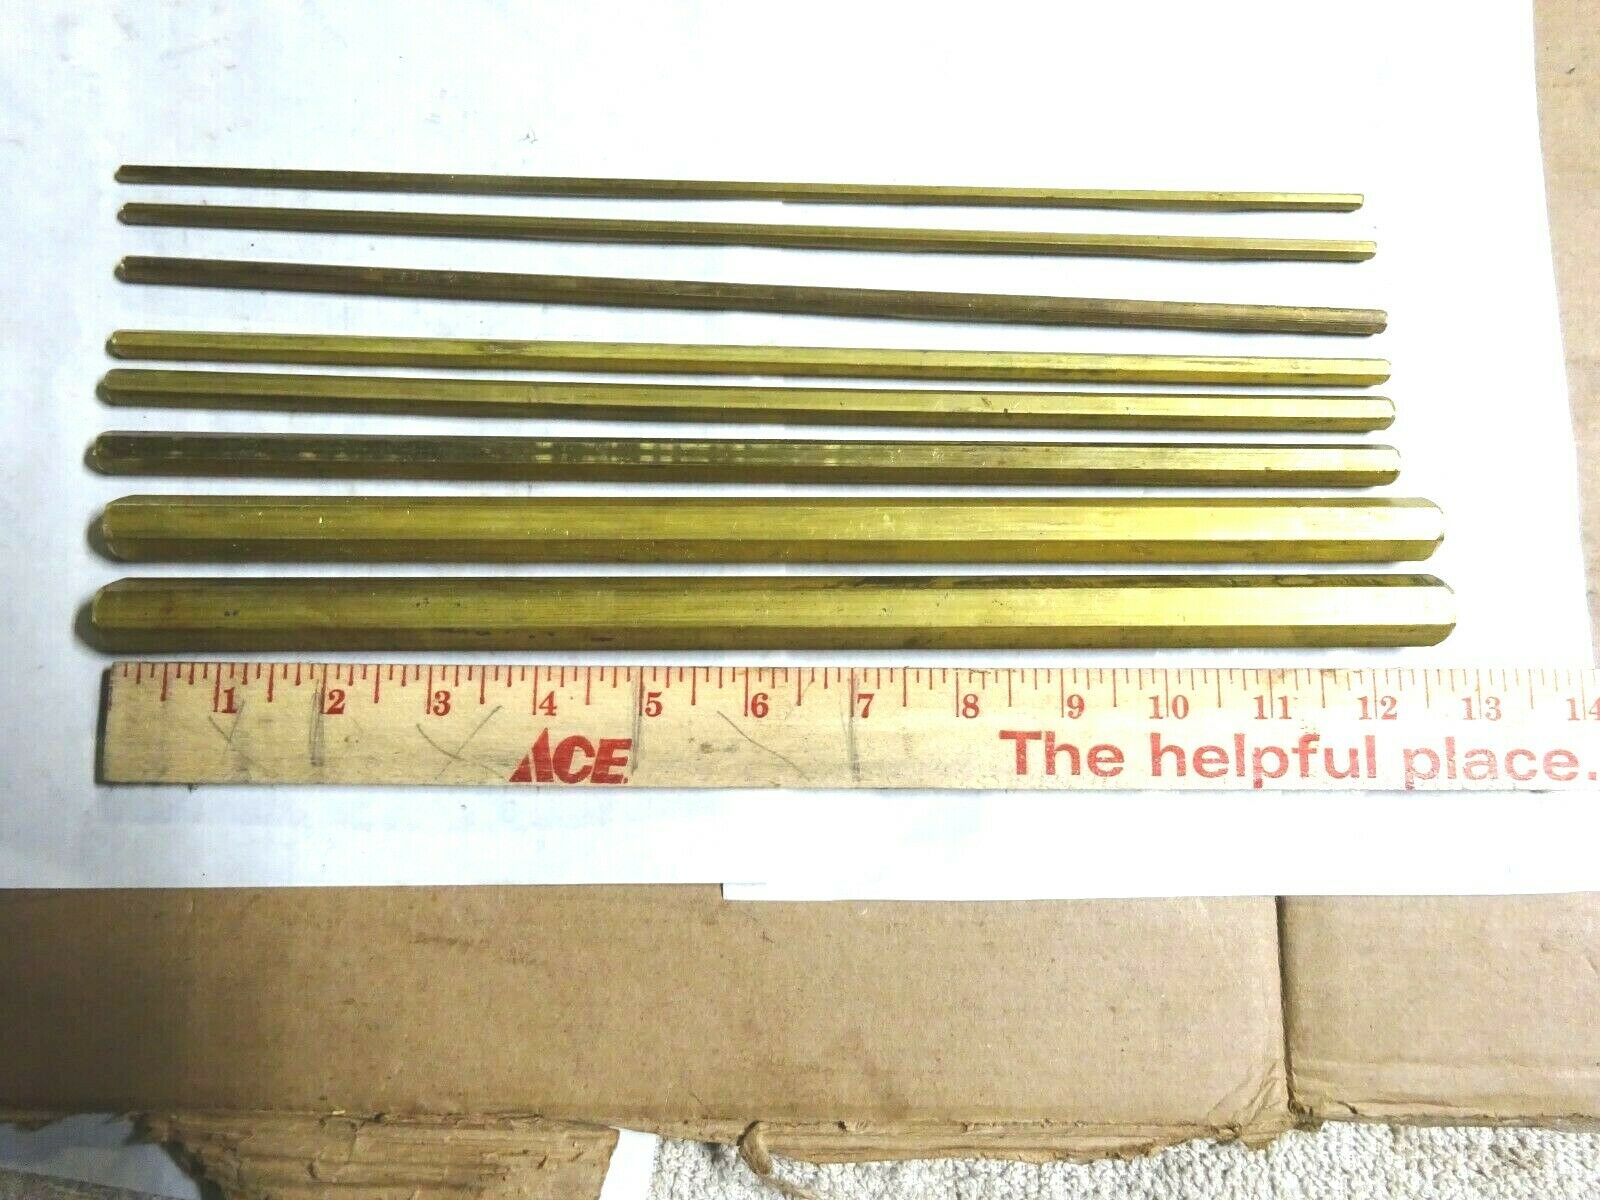 8 Pieces 360 Hex Brass Rods 5/32,3/16,15/64,1/4,5/16,3/8, 9/16,& 5/8 12" Long.